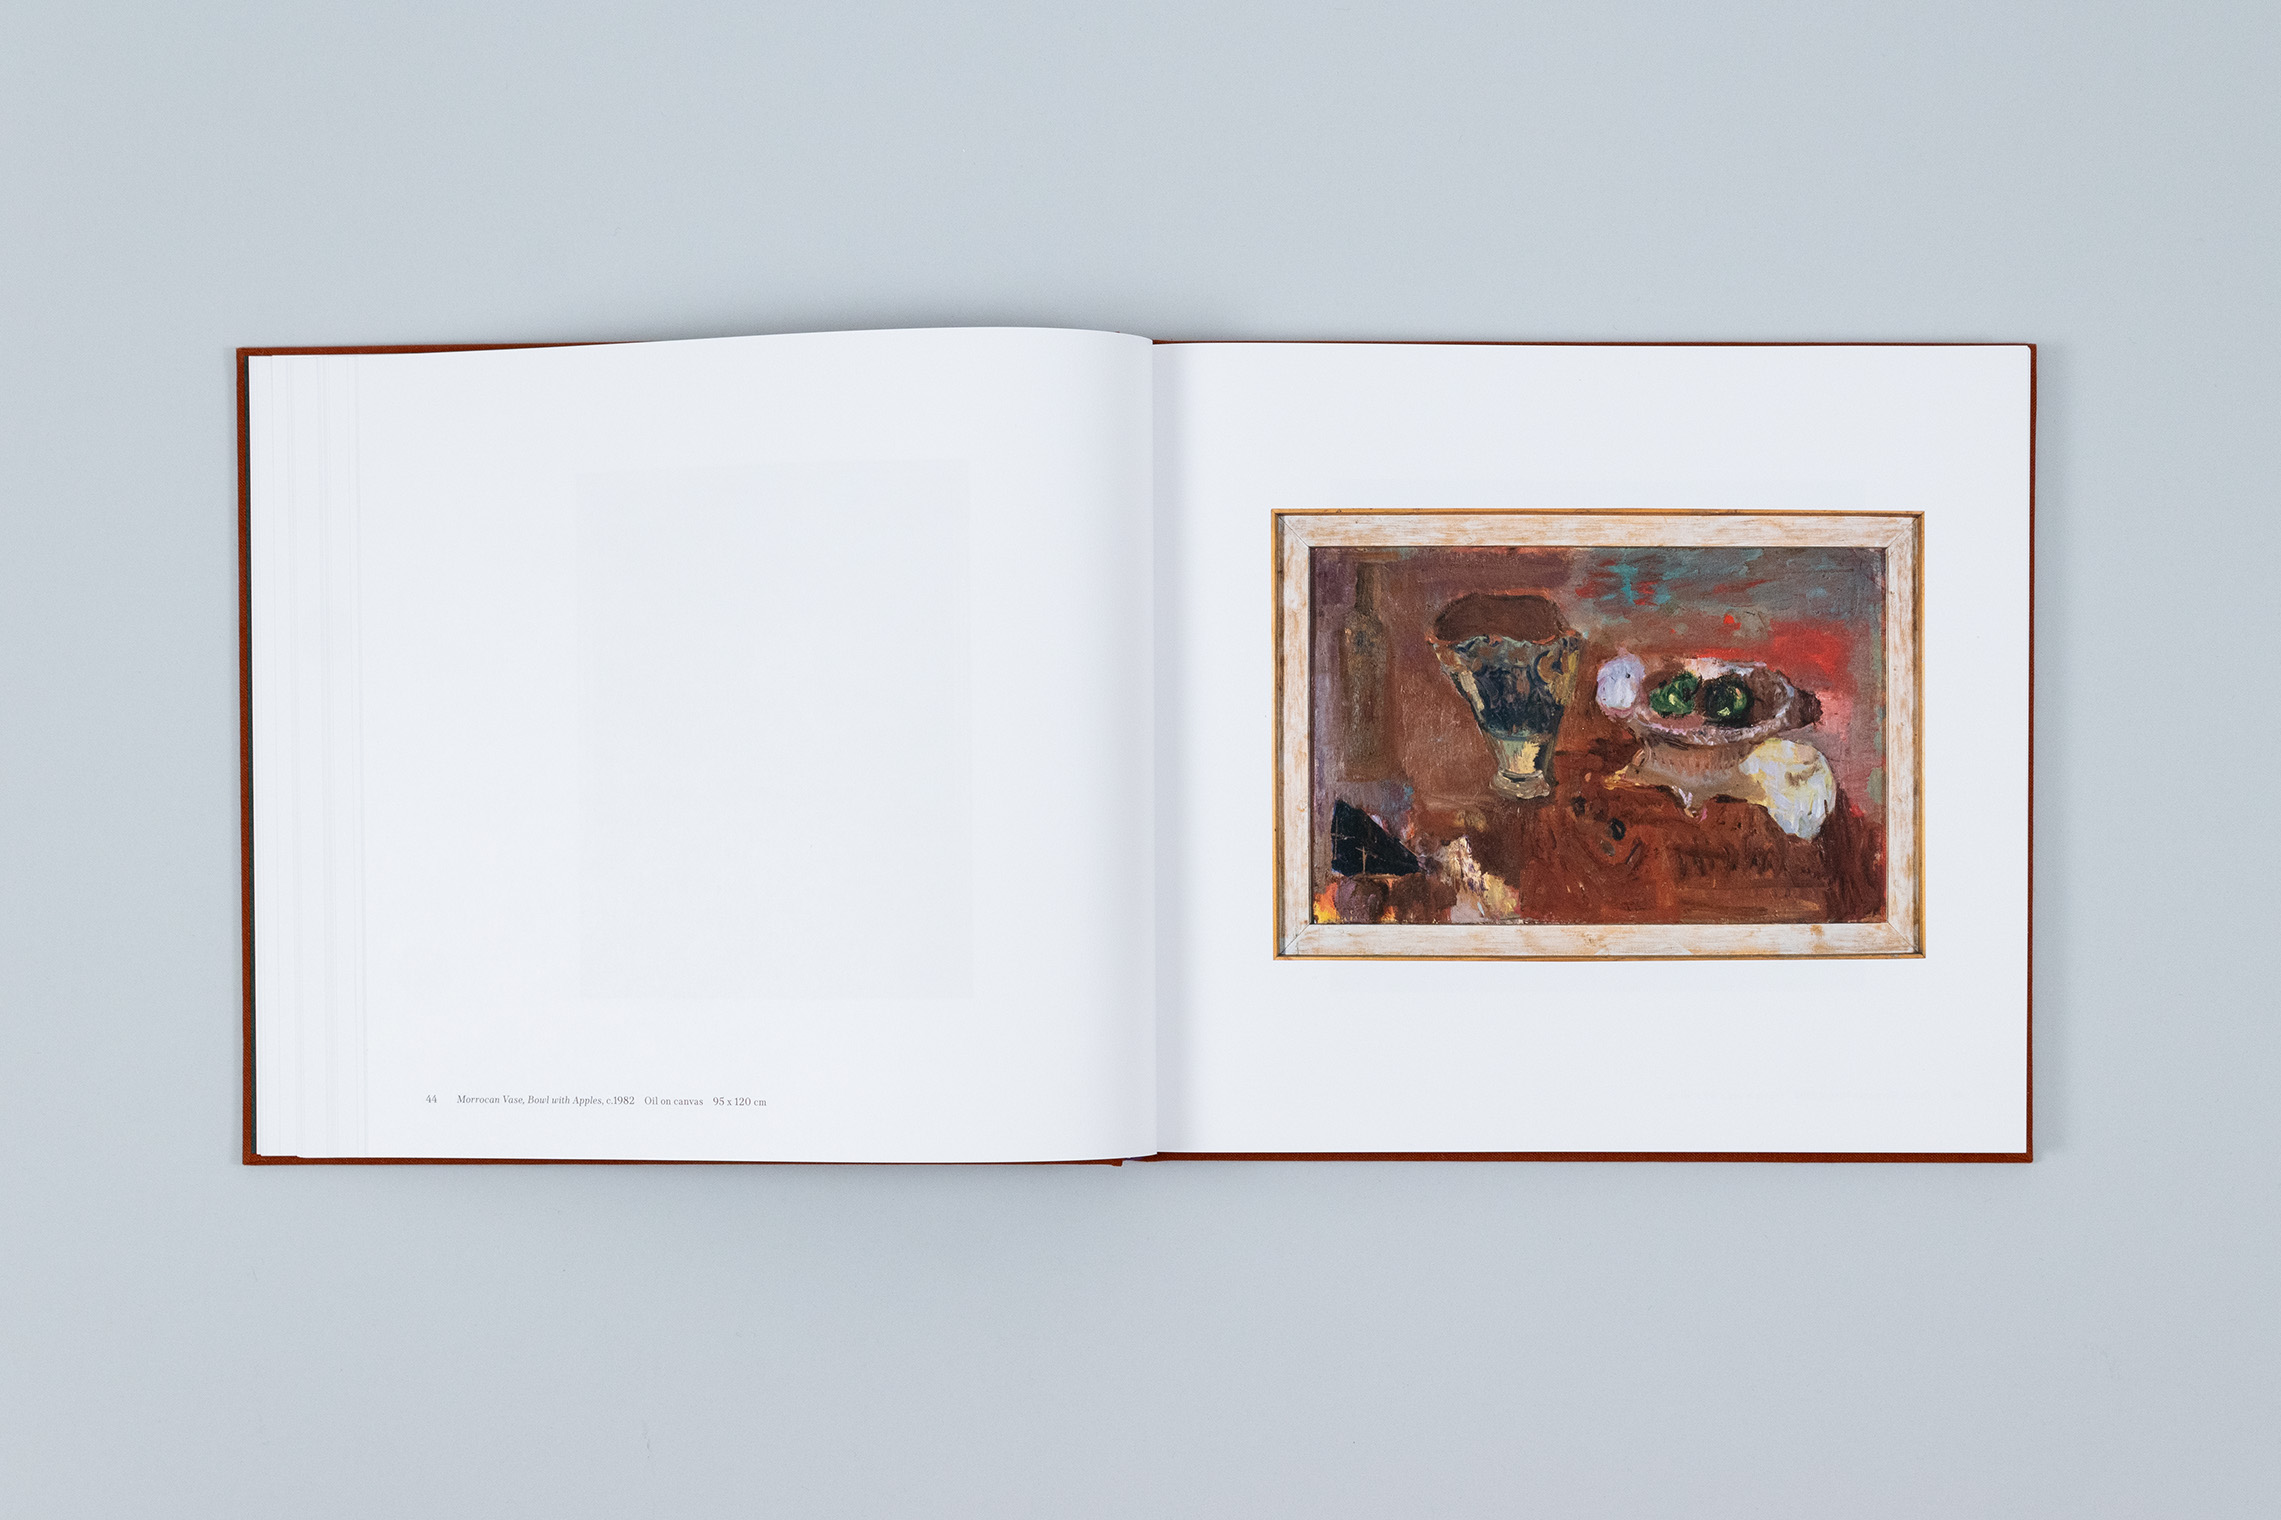 Carole Gibbons monograph spread with a predominantly red still life oil painting in a wooden artists' frame